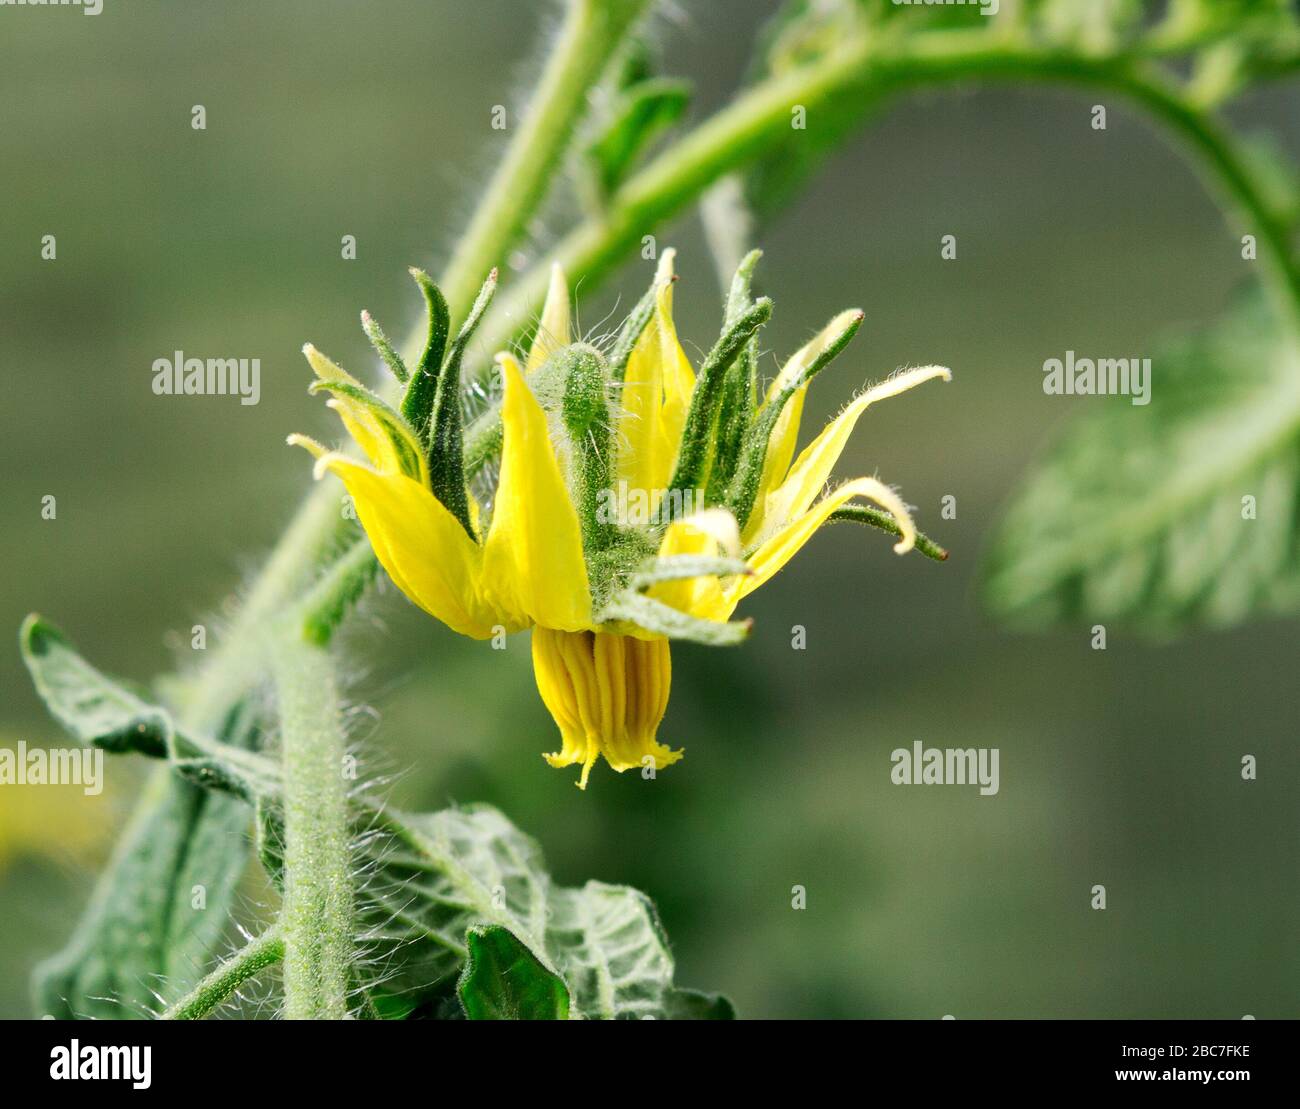 Flower close up. Tomato plant flower closeup. Growing tomatoes in the greenhouse. Stock Photo